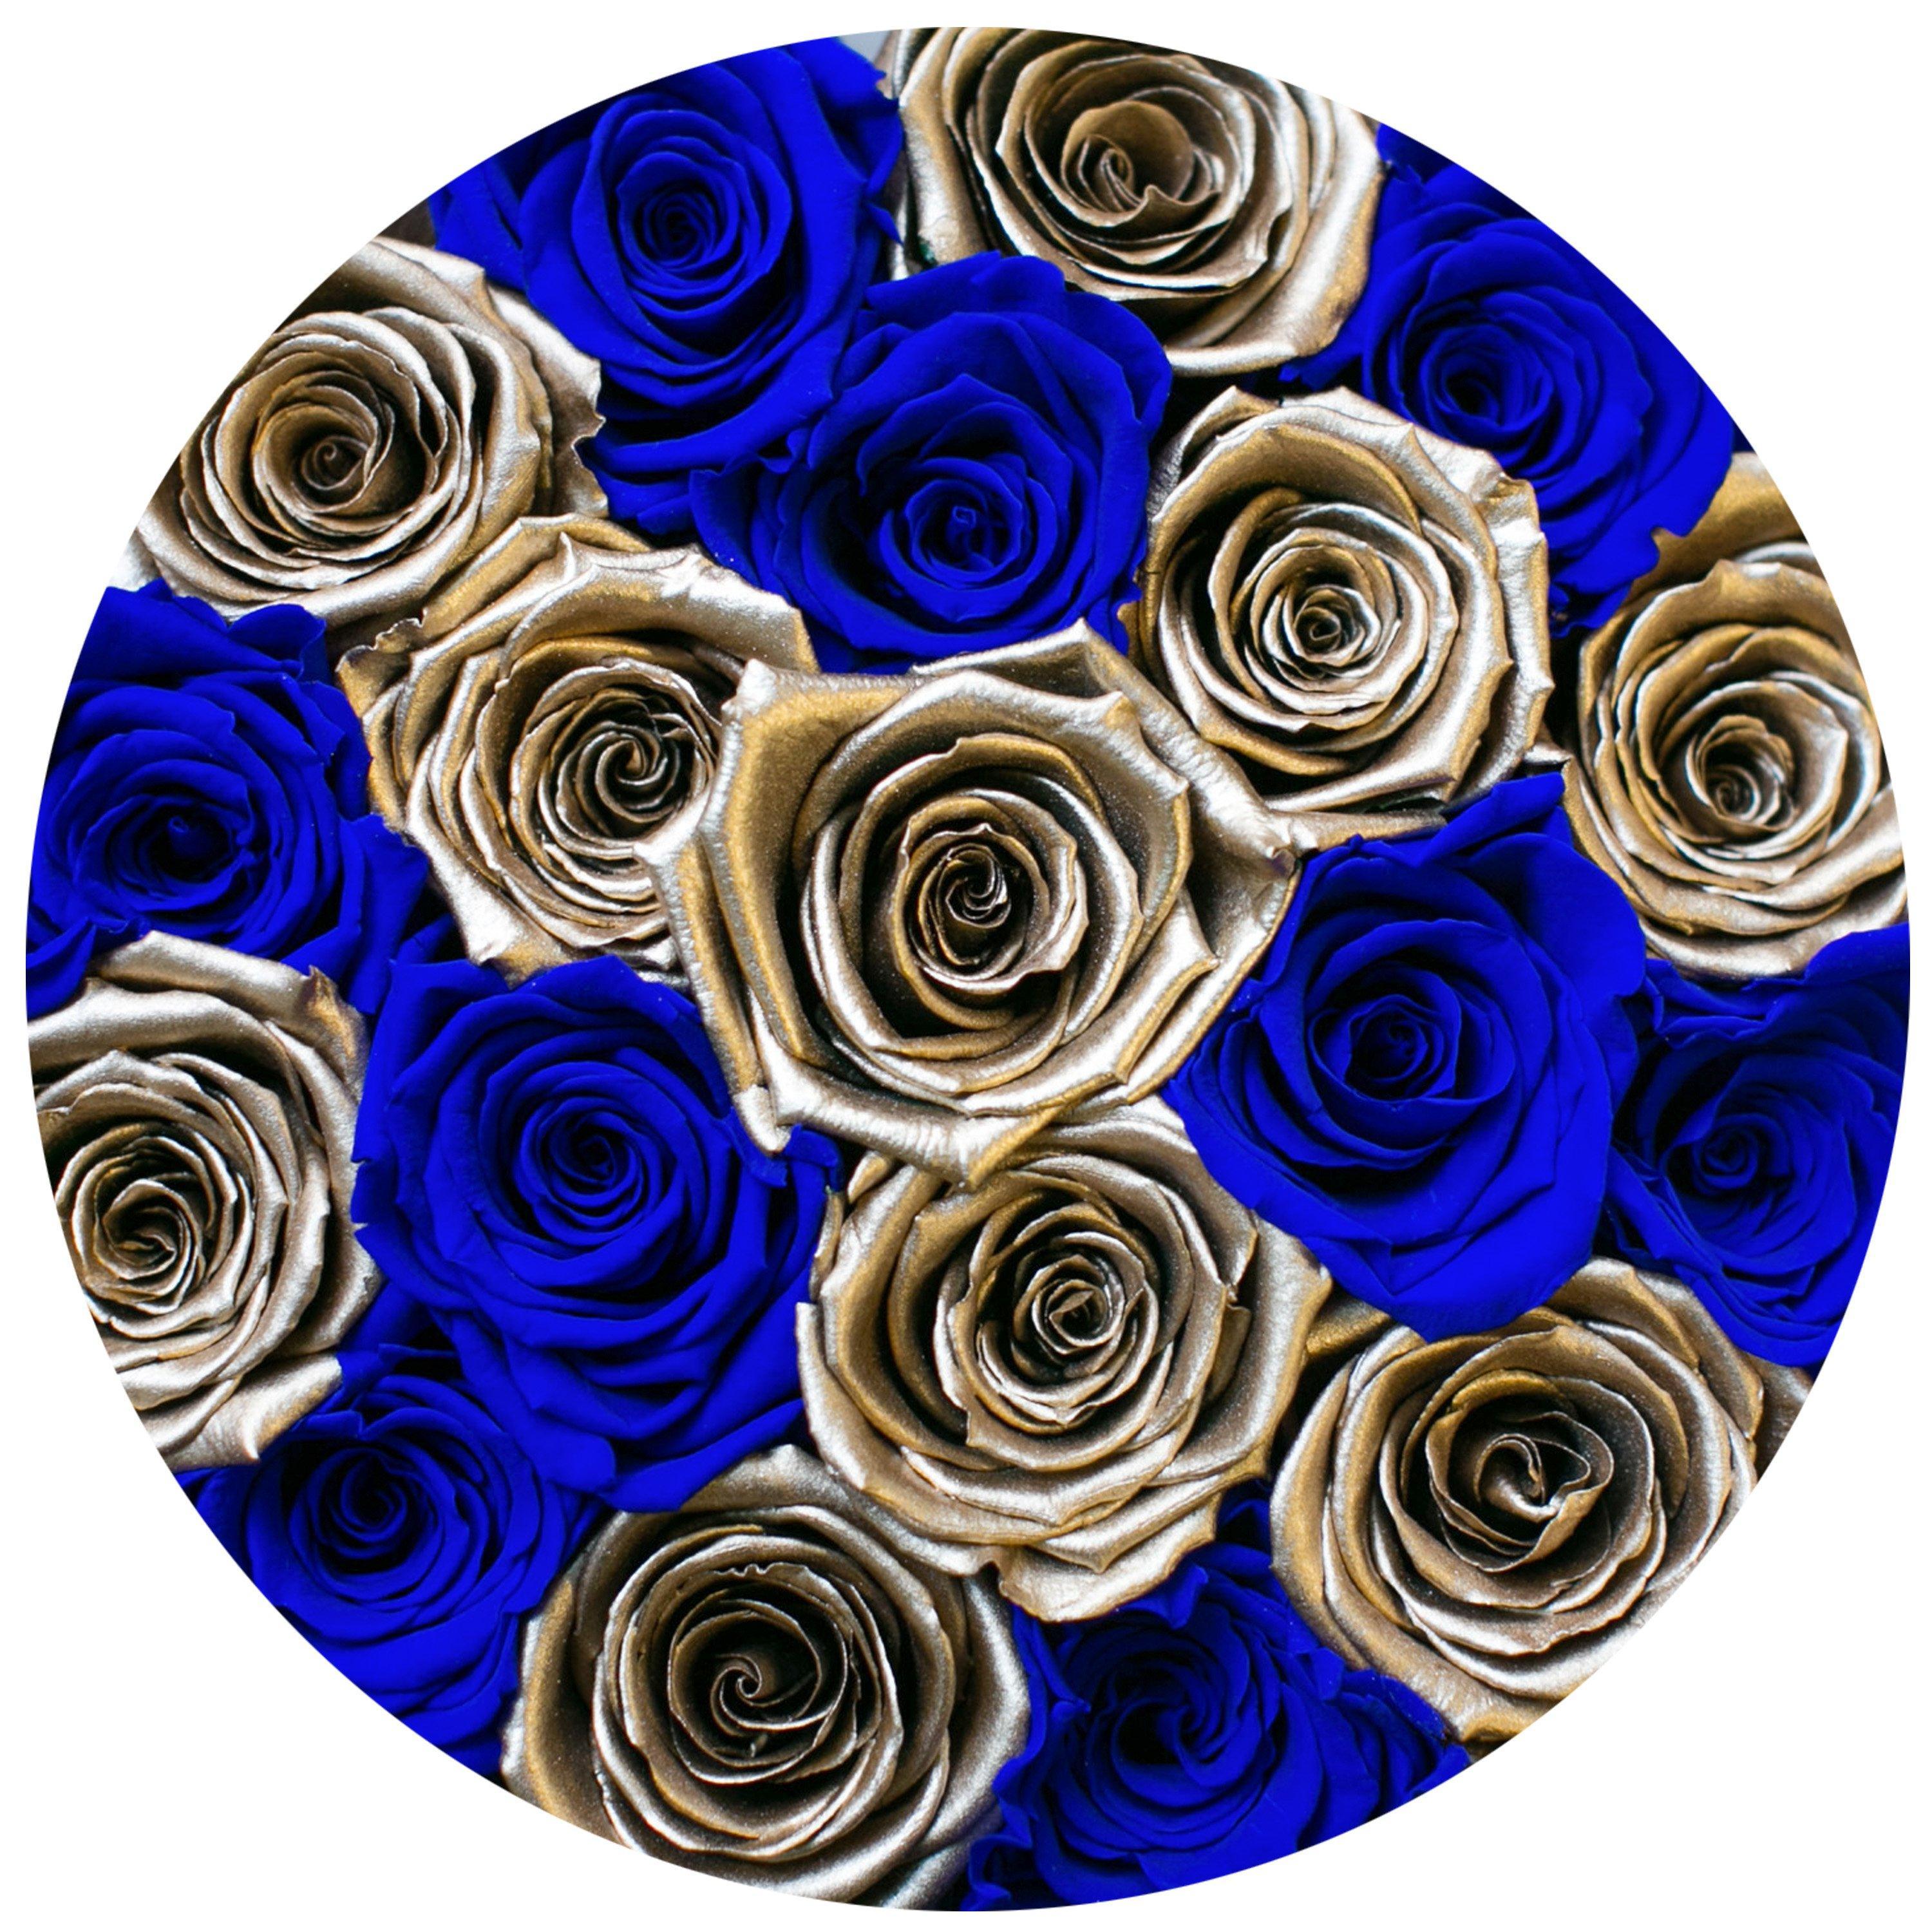 classic round box - royal-blue suede box - royal-blue(sparkle effect/gold roses gold eternity roses - the million roses